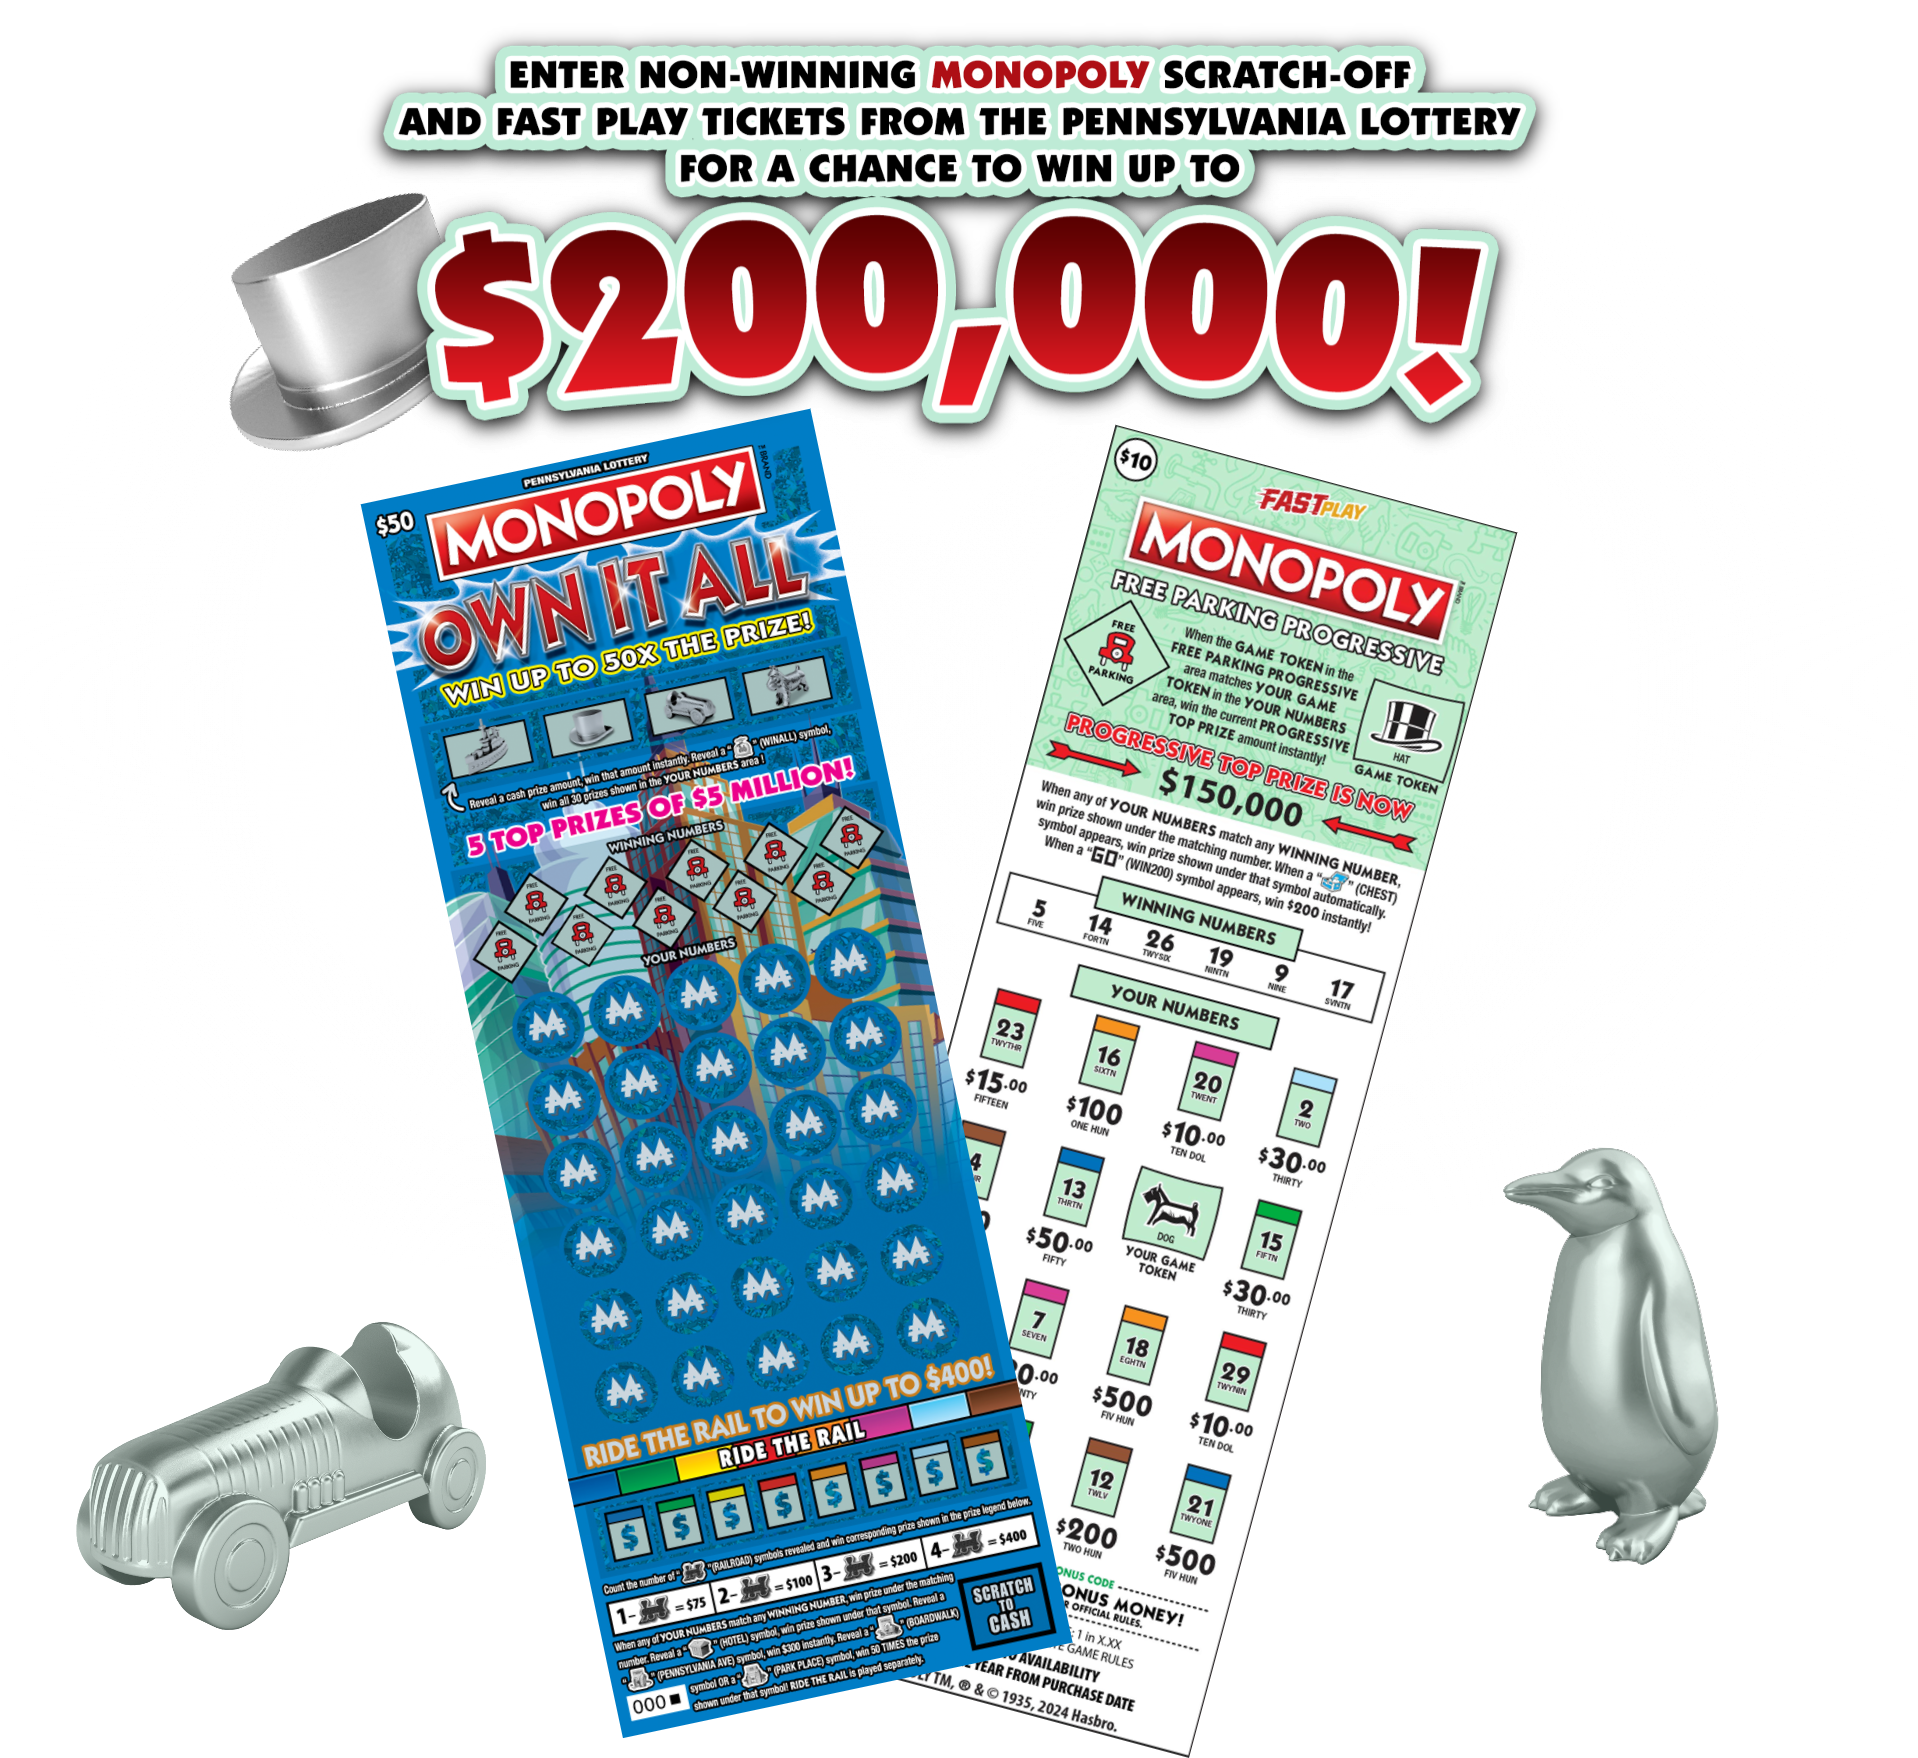 Enter non-winning MONOPOLY Scratch-Off and Fast Play tickets from the Pennsylvania Lottery for a chance to win up to $200,000!